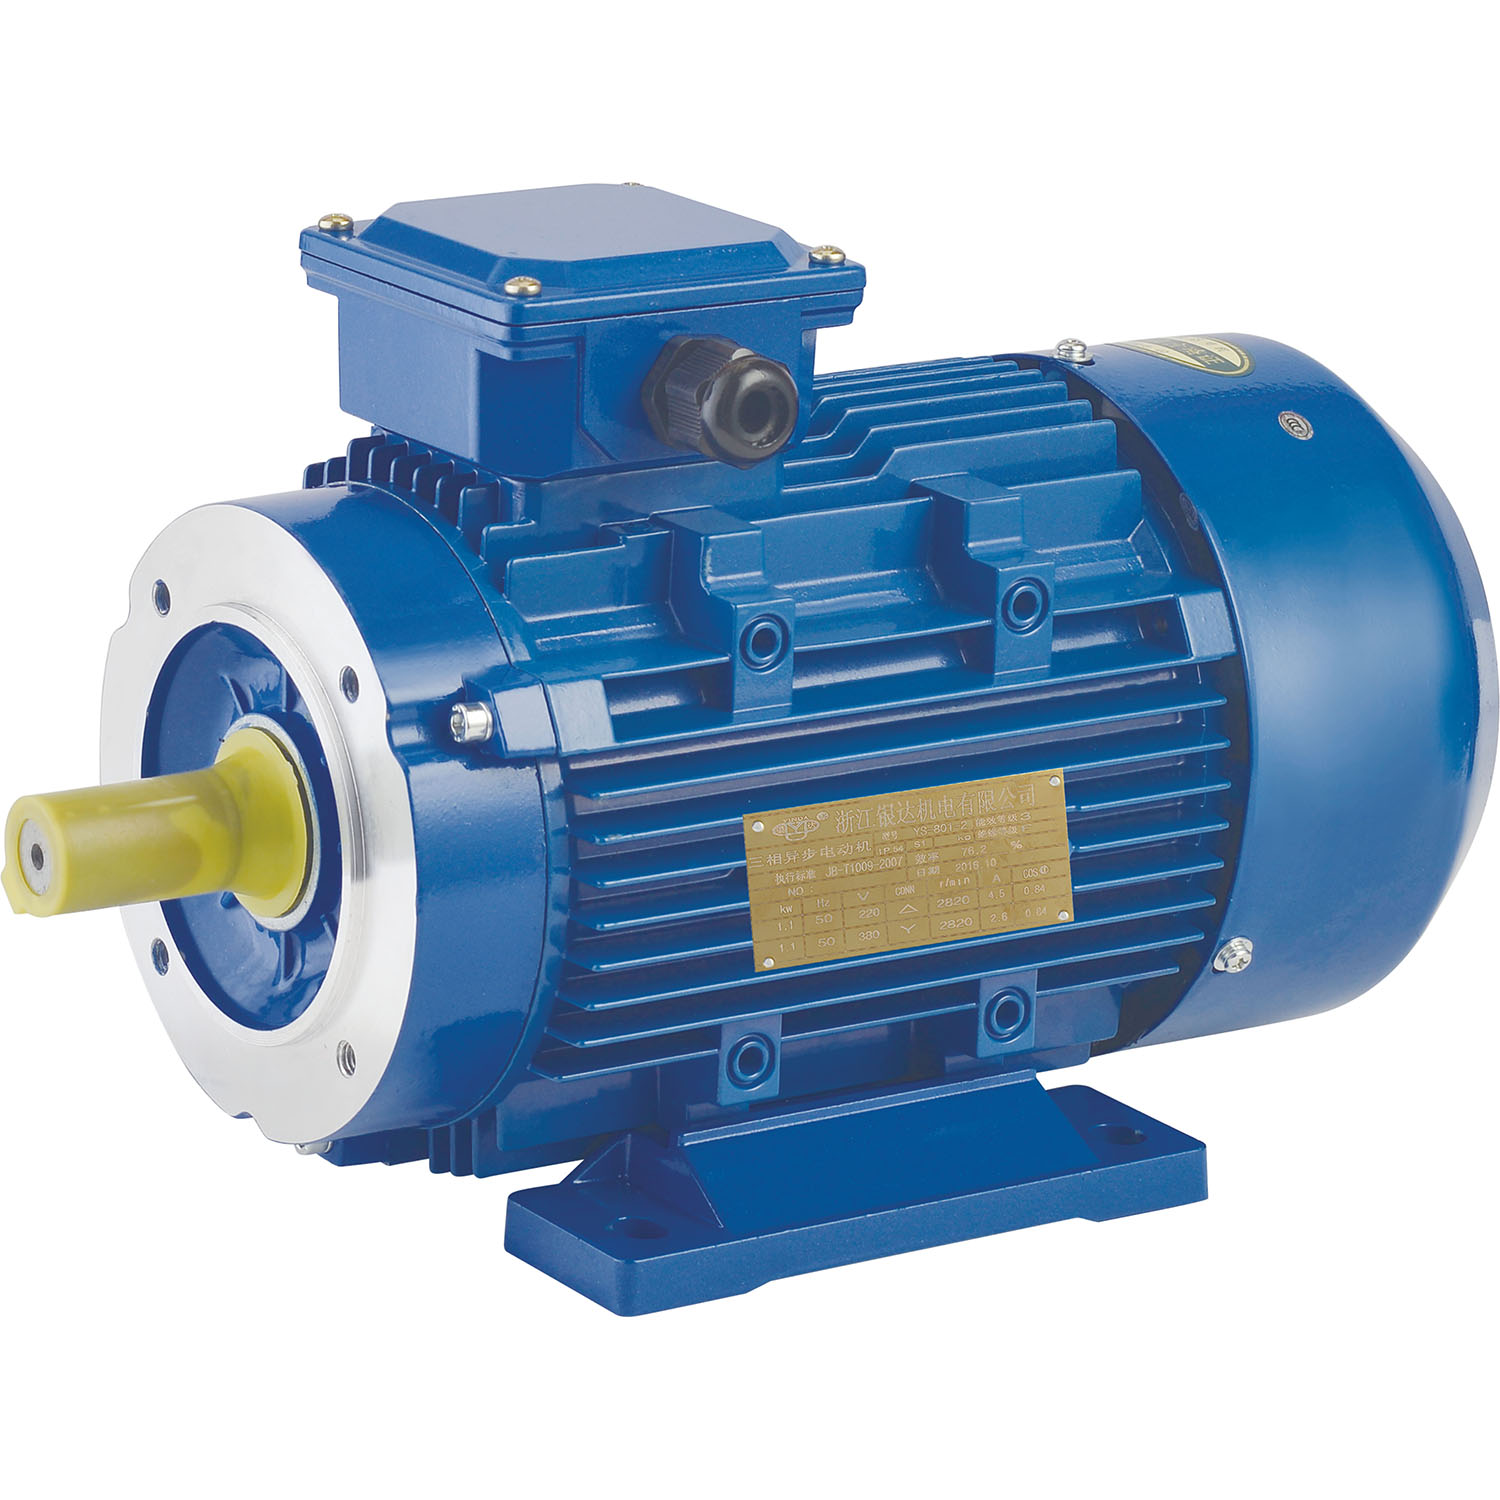 YX3-90L-8 0.55KW 0.75HP aluminum cylinder series high efficiency three-phase asynchronous motor